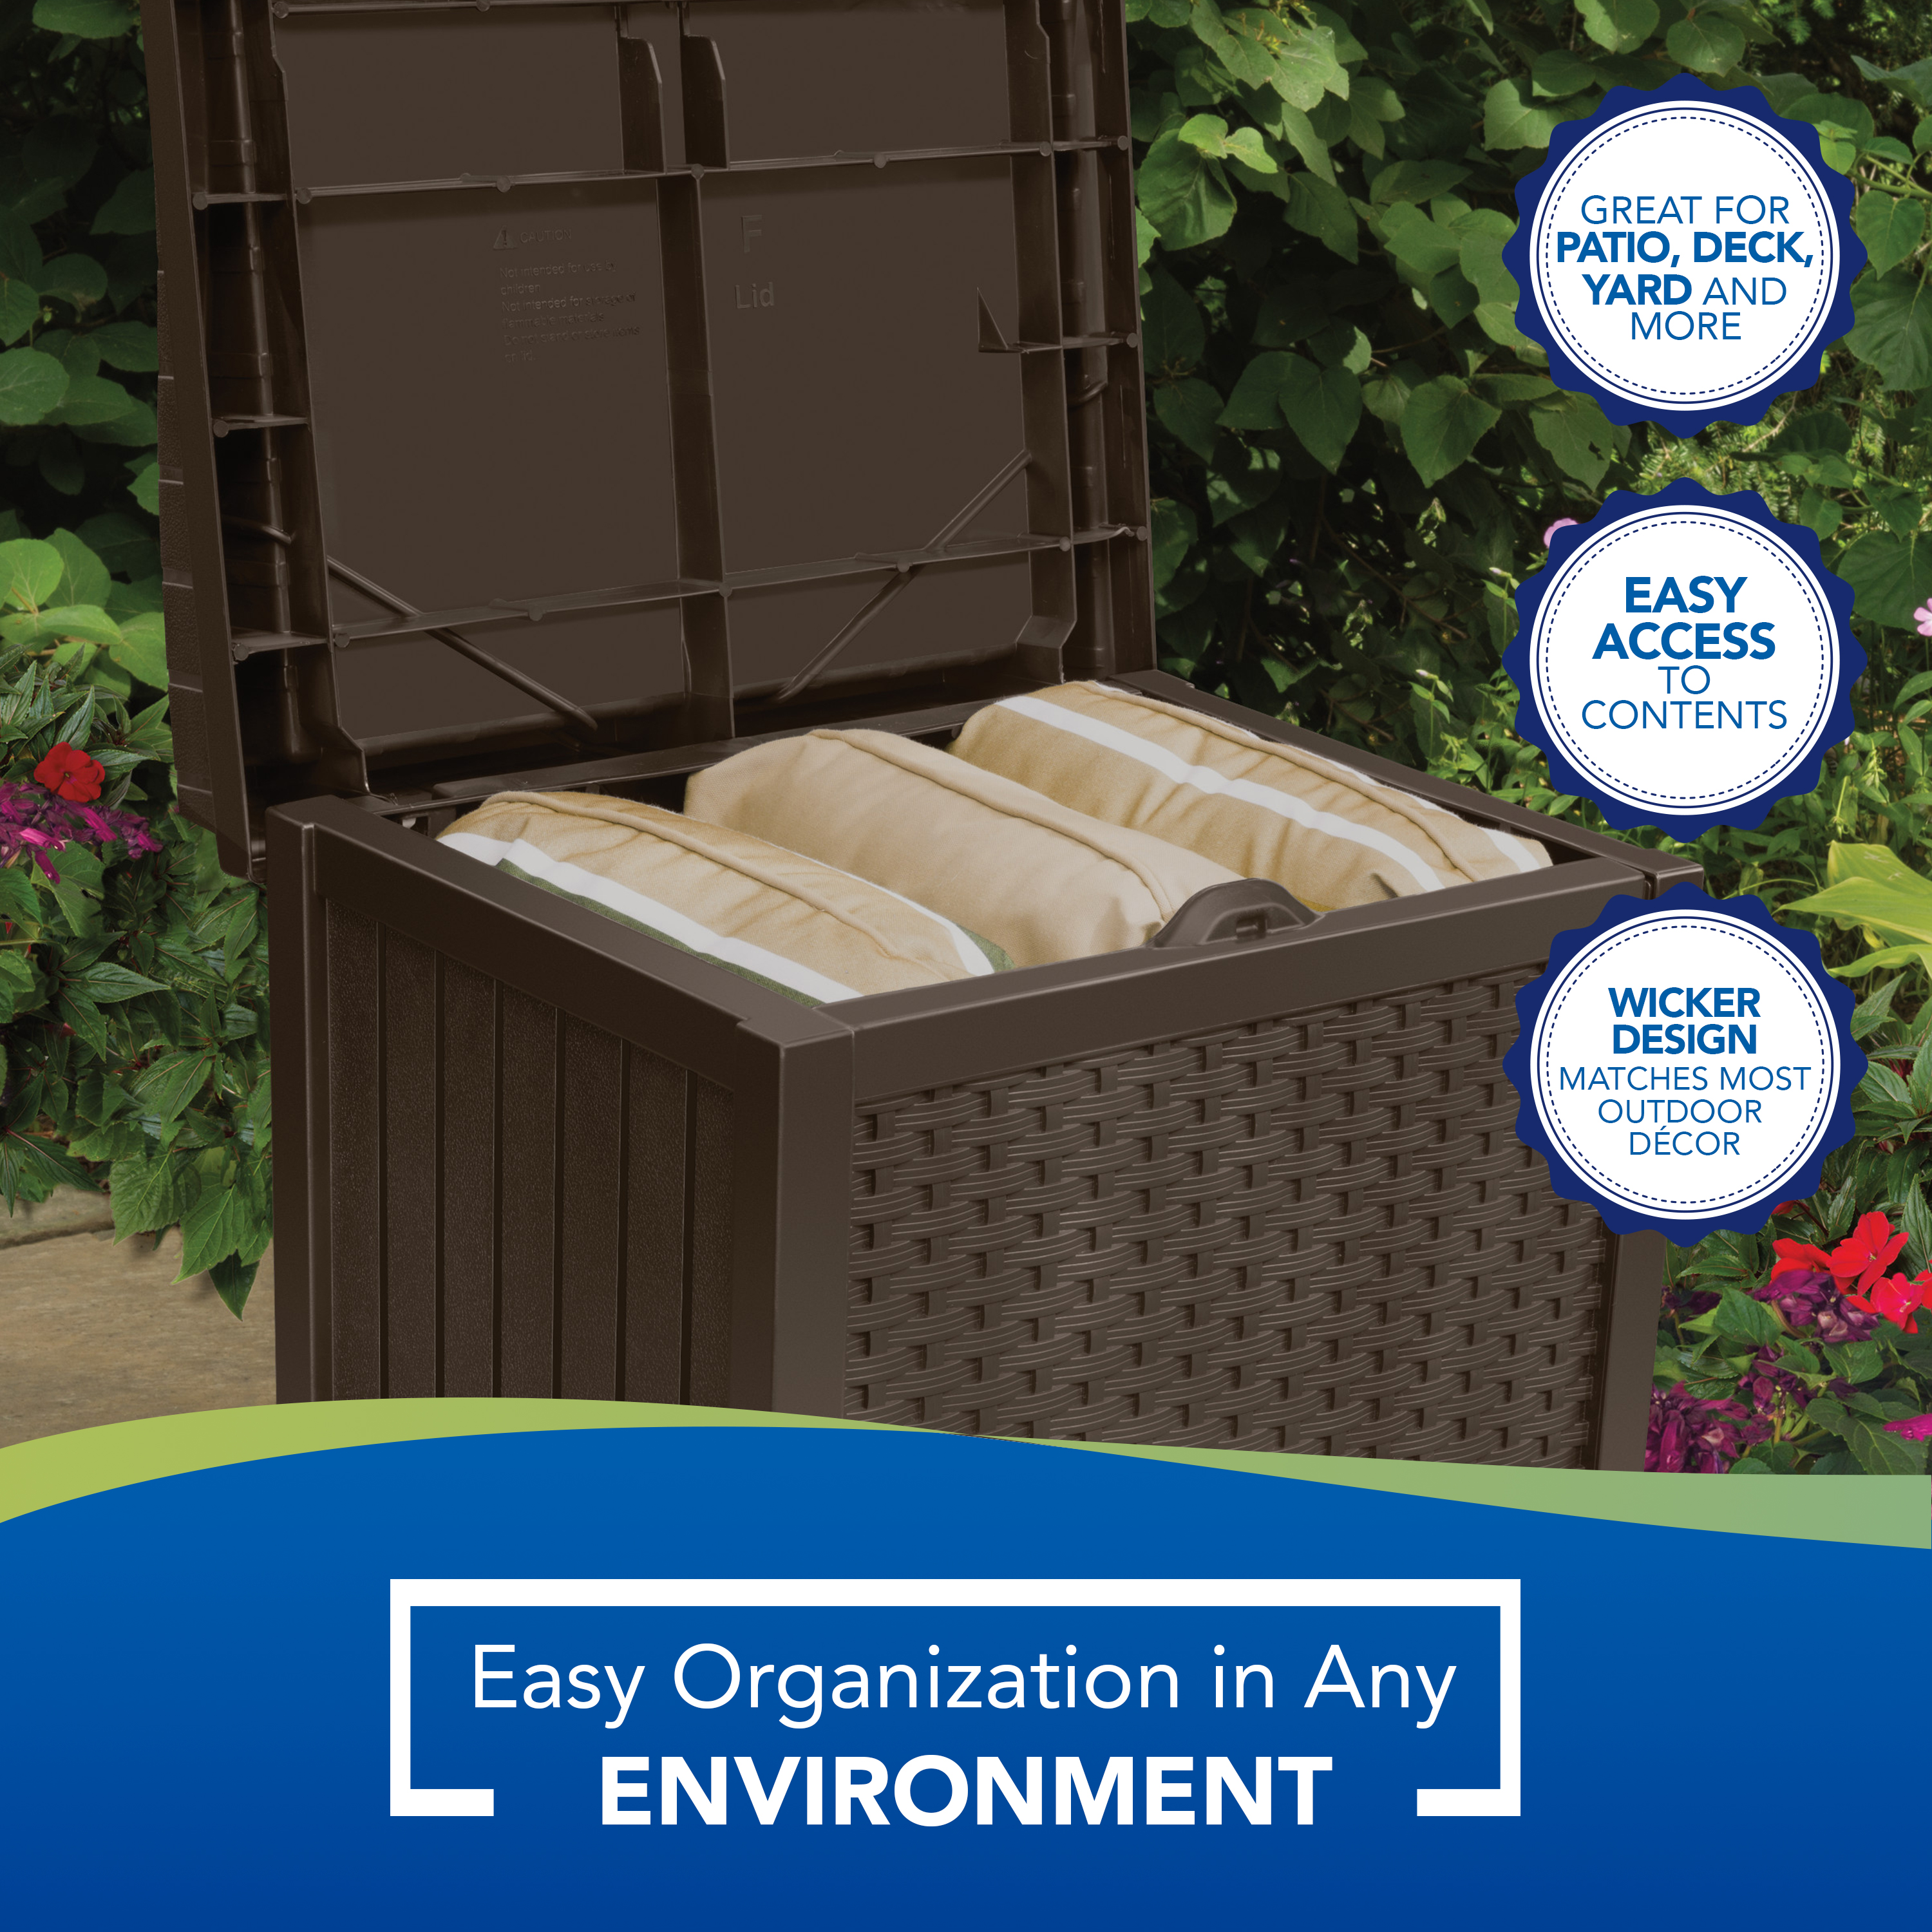 Suncast Outdoor 22 Gallon Resin and Wicker Deck Box with Seat, Java Brown - image 3 of 9